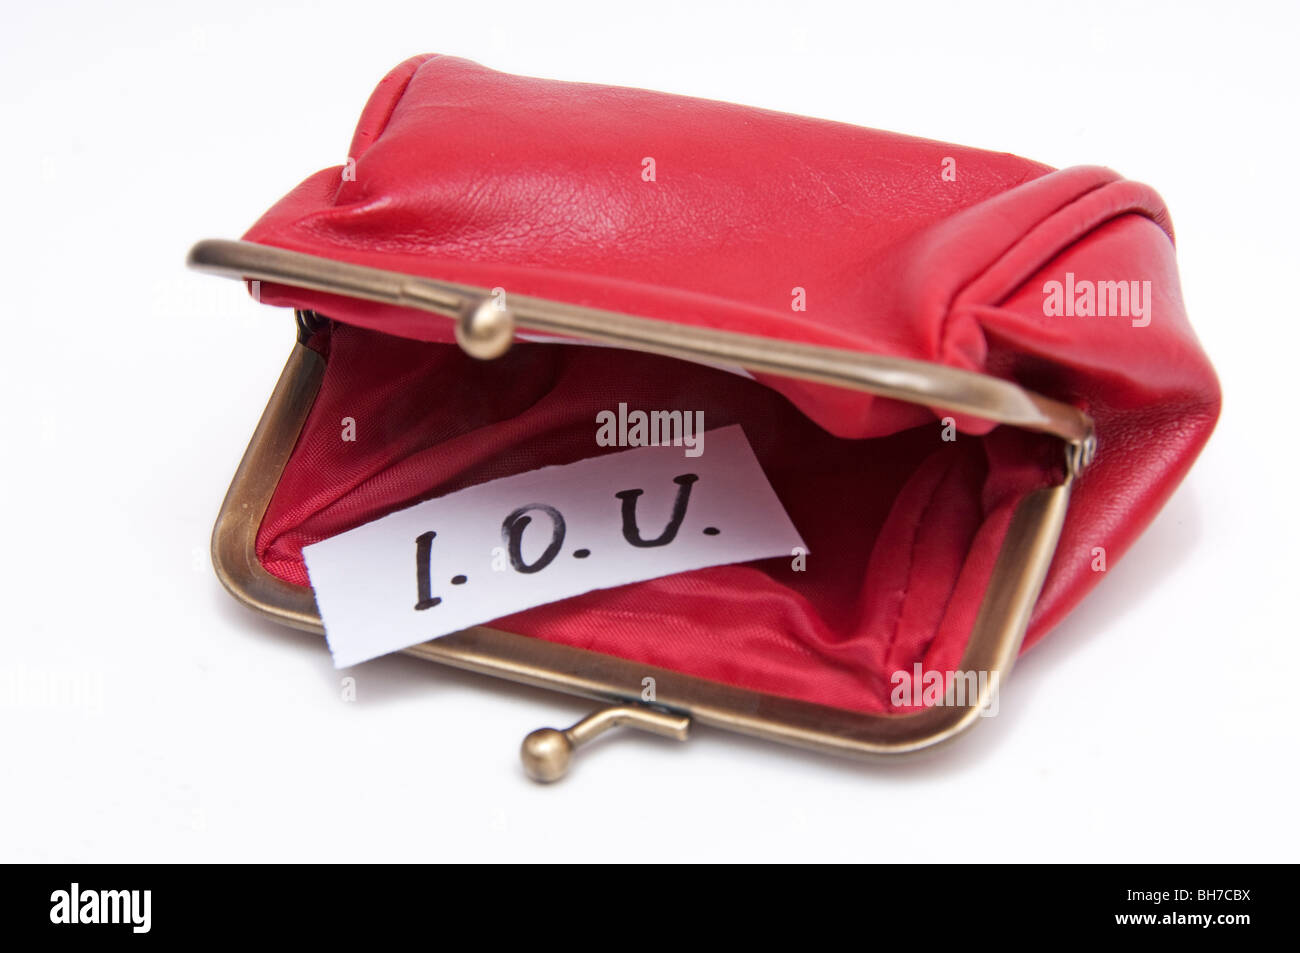 Empty purse stock image. Image of recession, concepts - 7299985